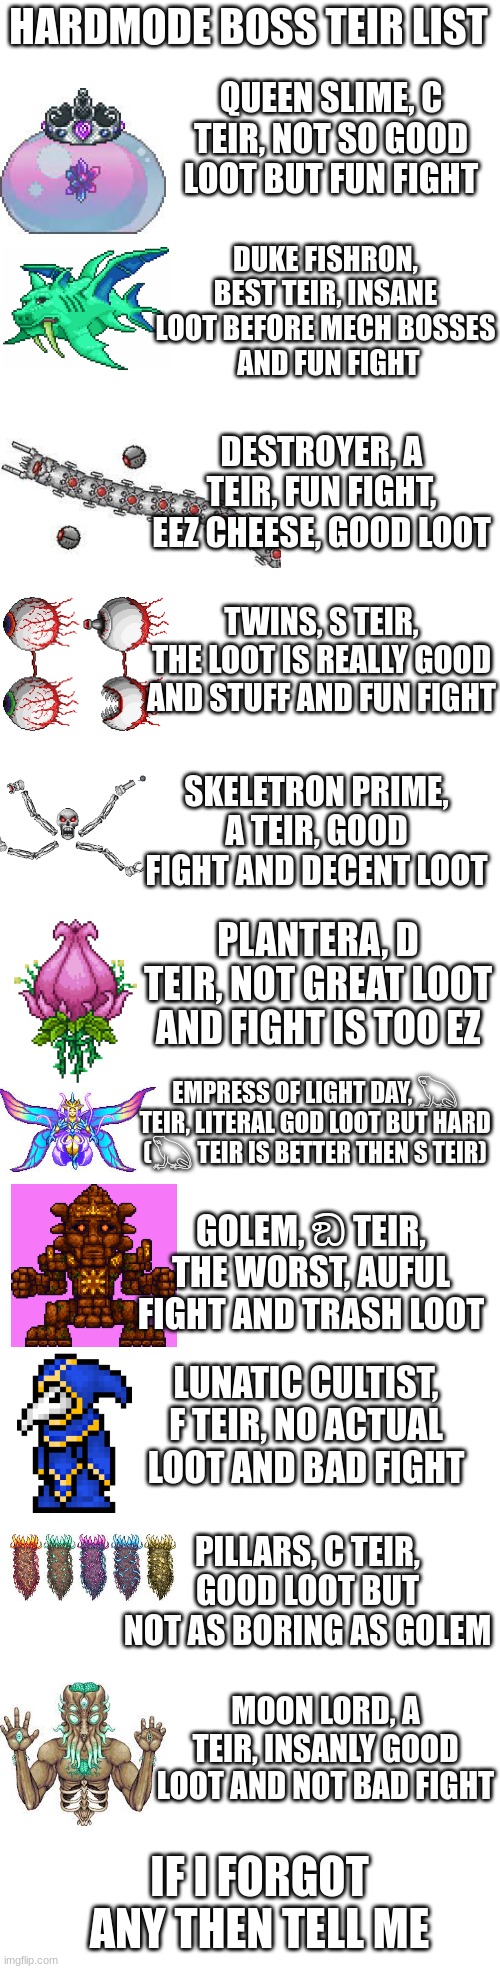 hardmode teir list | HARDMODE BOSS TEIR LIST; QUEEN SLIME, C TEIR, NOT SO GOOD LOOT BUT FUN FIGHT; DUKE FISHRON, BEST TEIR, INSANE LOOT BEFORE MECH BOSSES
 AND FUN FIGHT; DESTROYER, A TEIR, FUN FIGHT, EEZ CHEESE, GOOD LOOT; TWINS, S TEIR, THE LOOT IS REALLY GOOD AND STUFF AND FUN FIGHT; SKELETRON PRIME, A TEIR, GOOD FIGHT AND DECENT LOOT; PLANTERA, D TEIR, NOT GREAT LOOT AND FIGHT IS TOO EZ; EMPRESS OF LIGHT DAY, 𓆏 TEIR, LITERAL GOD LOOT BUT HARD (𓆏 TEIR IS BETTER THEN S TEIR); GOLEM, ඞ TEIR, THE WORST, AUFUL FIGHT AND TRASH LOOT; LUNATIC CULTIST, F TEIR, NO ACTUAL LOOT AND BAD FIGHT; PILLARS, C TEIR, GOOD LOOT BUT NOT AS BORING AS GOLEM; MOON LORD, A TEIR, INSANLY GOOD LOOT AND NOT BAD FIGHT; IF I FORGOT ANY THEN TELL ME | image tagged in memes,blank transparent square | made w/ Imgflip meme maker